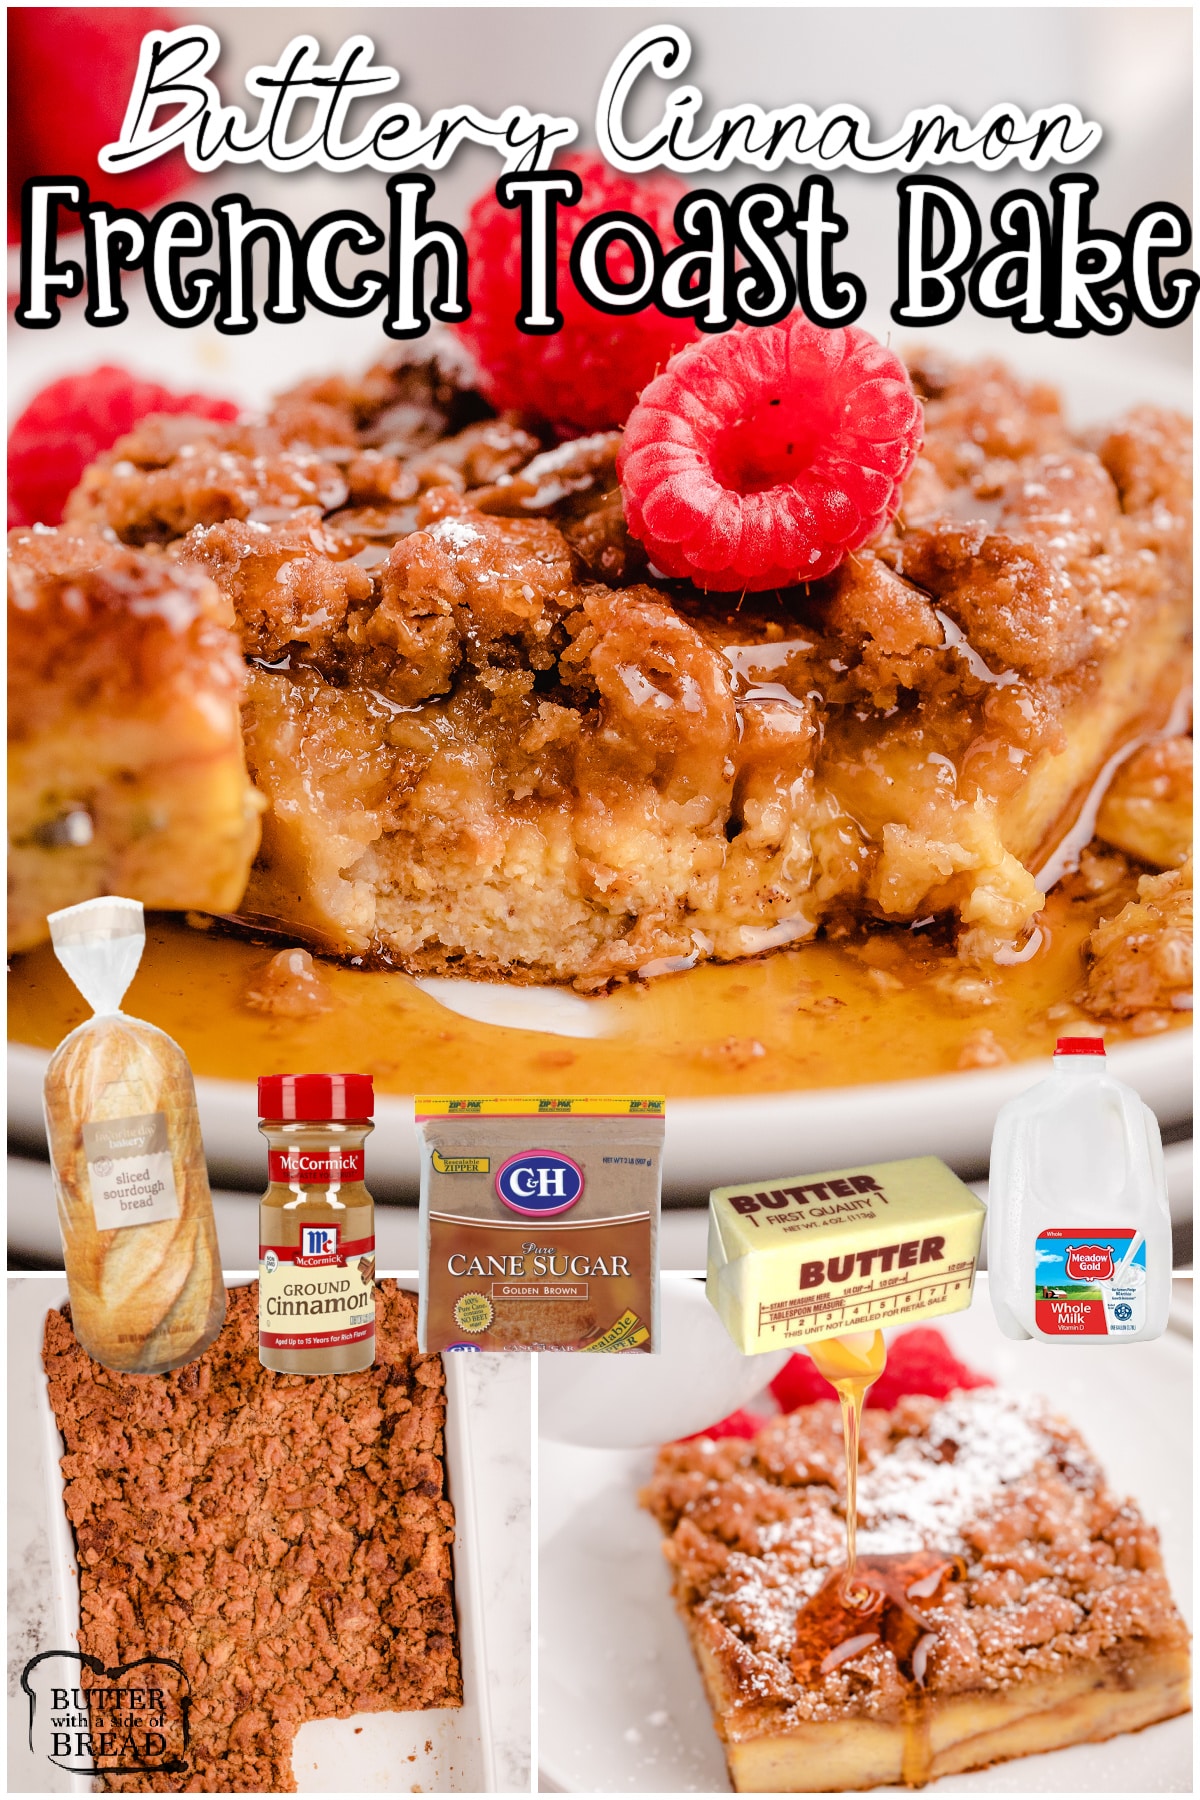 French Toast Bake made with soft bread, spiced with warm cinnamon & brown sugar. Breakfast cinnamon french toast bake is made the night before, then baked & served with berries the next day!